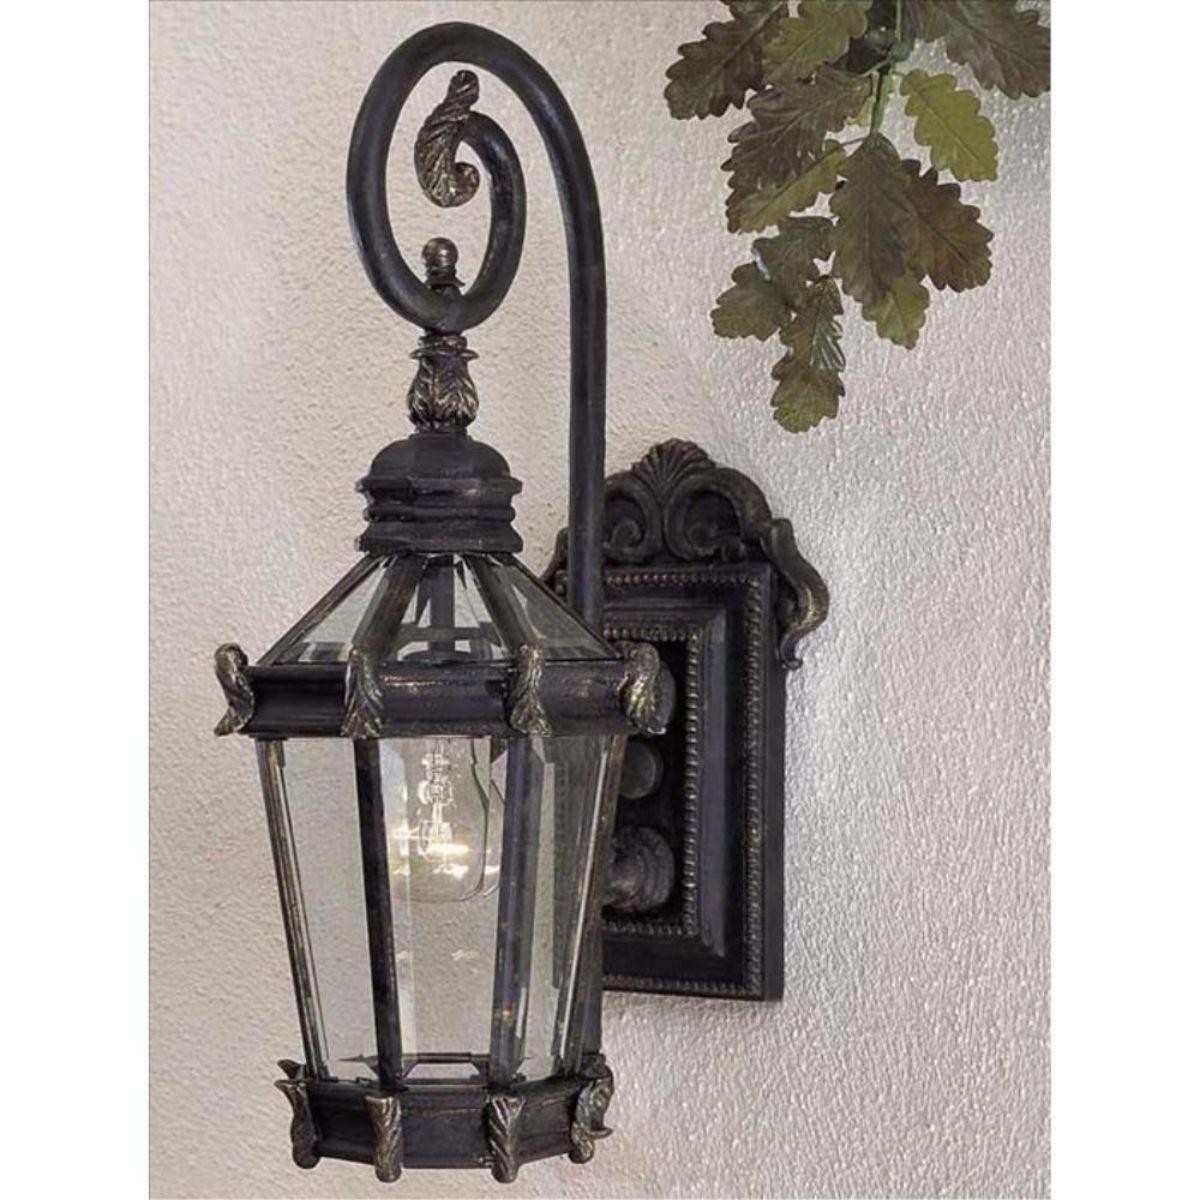 Stratford Hall 21 in. Outdoor Wall Lantern Heritage & Gold Finish